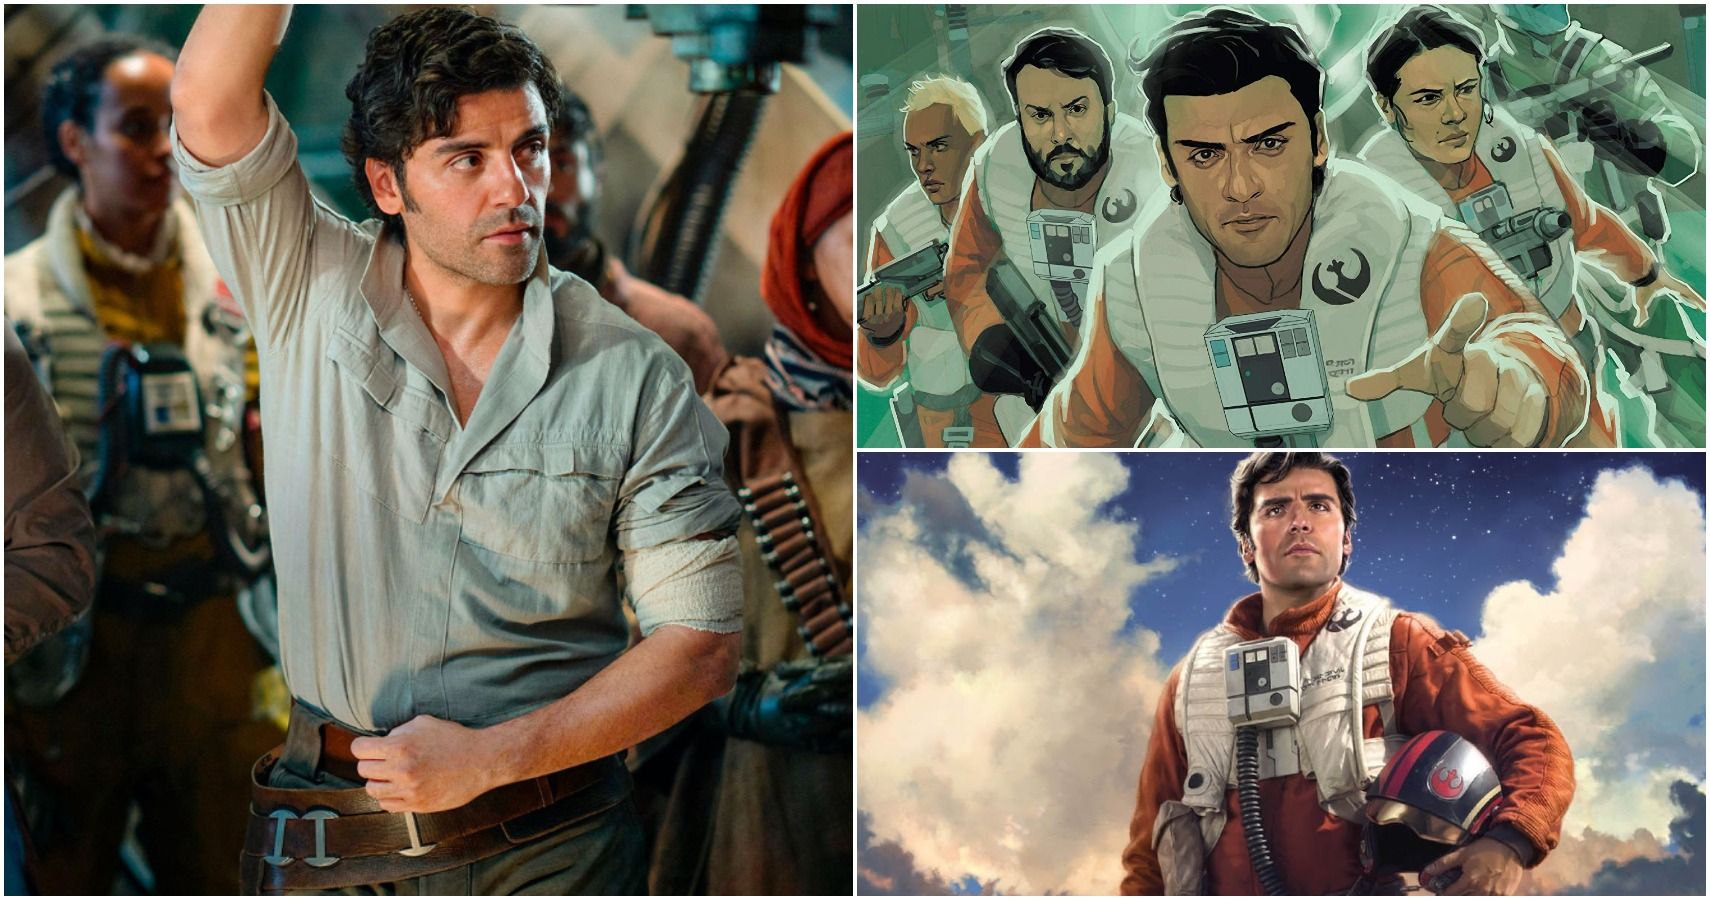 Star Wars 10 Details About Poe Dameron You Won’t Know If You Only Watched The Movies